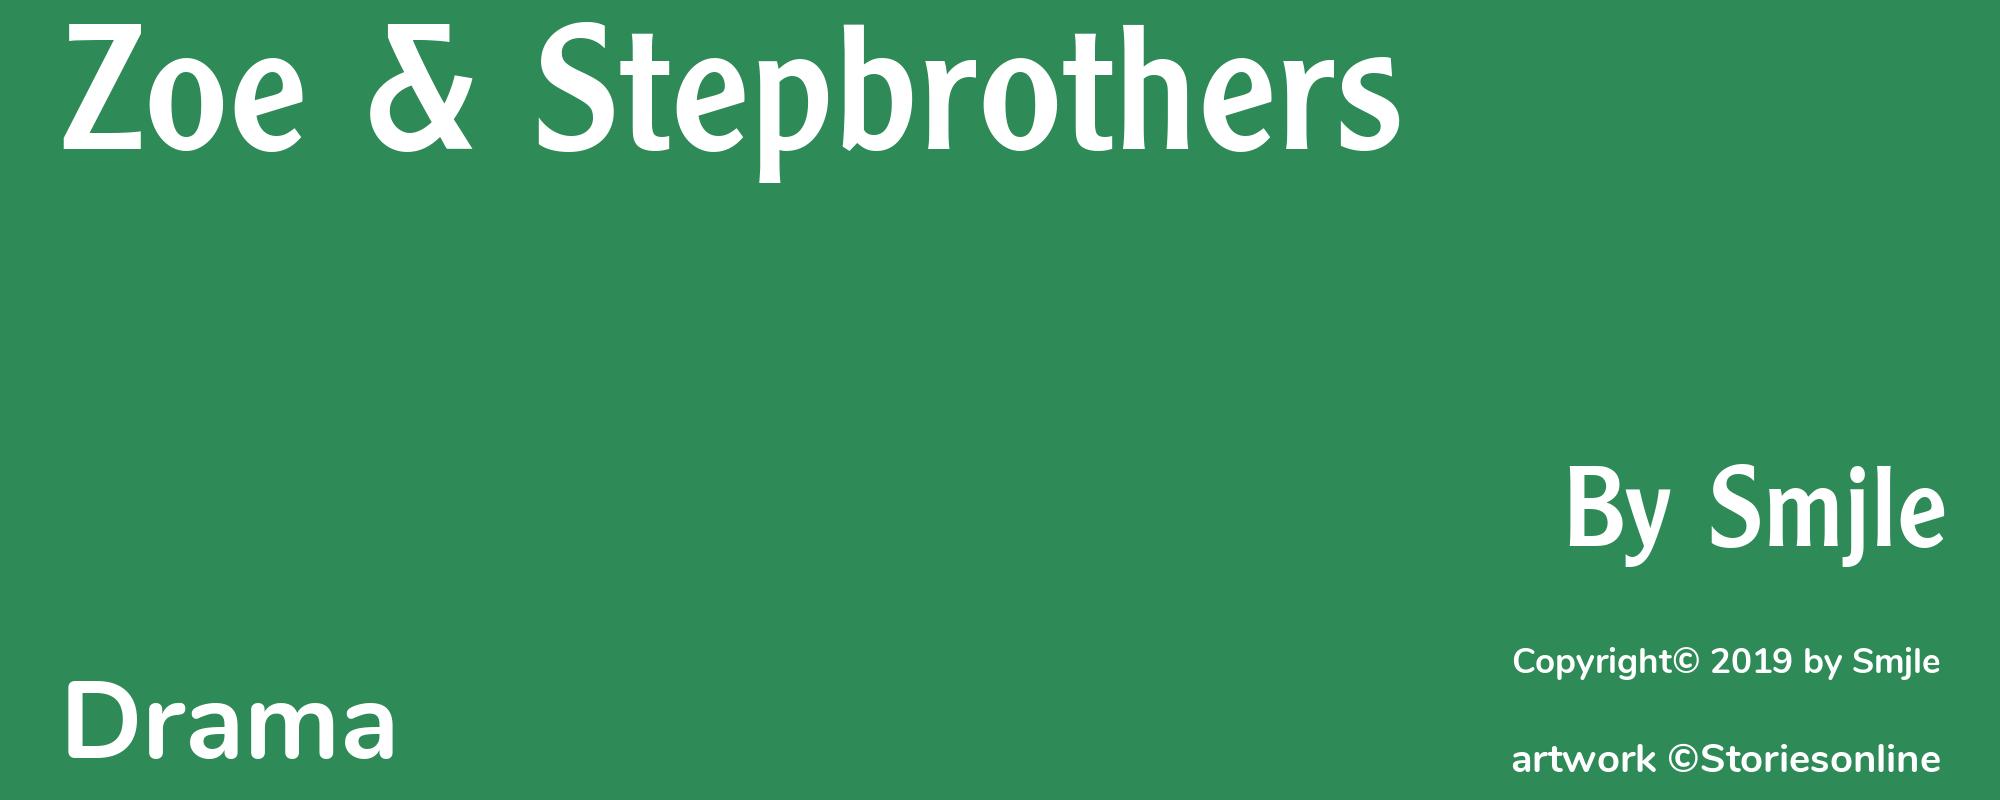 Zoe & Stepbrothers - Cover